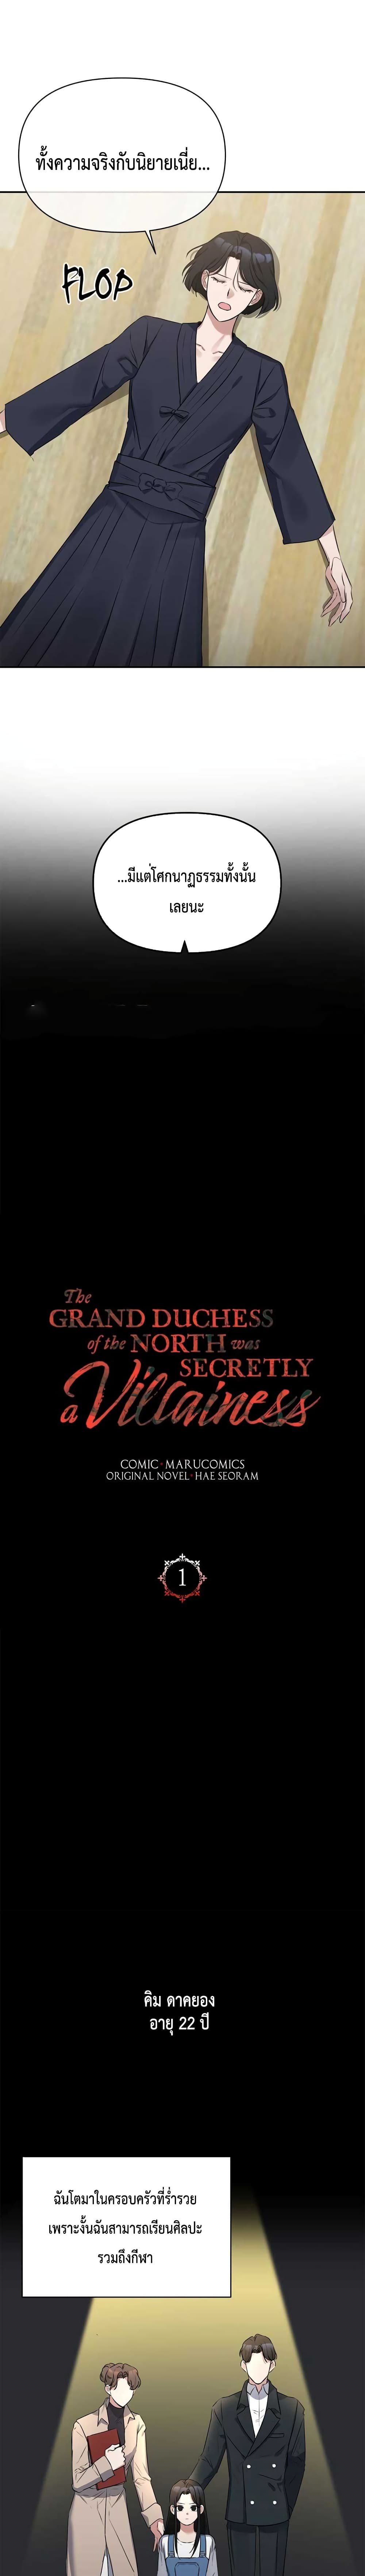 The Grand Duchess of the North Was Secretly a Villainess 1 (9)